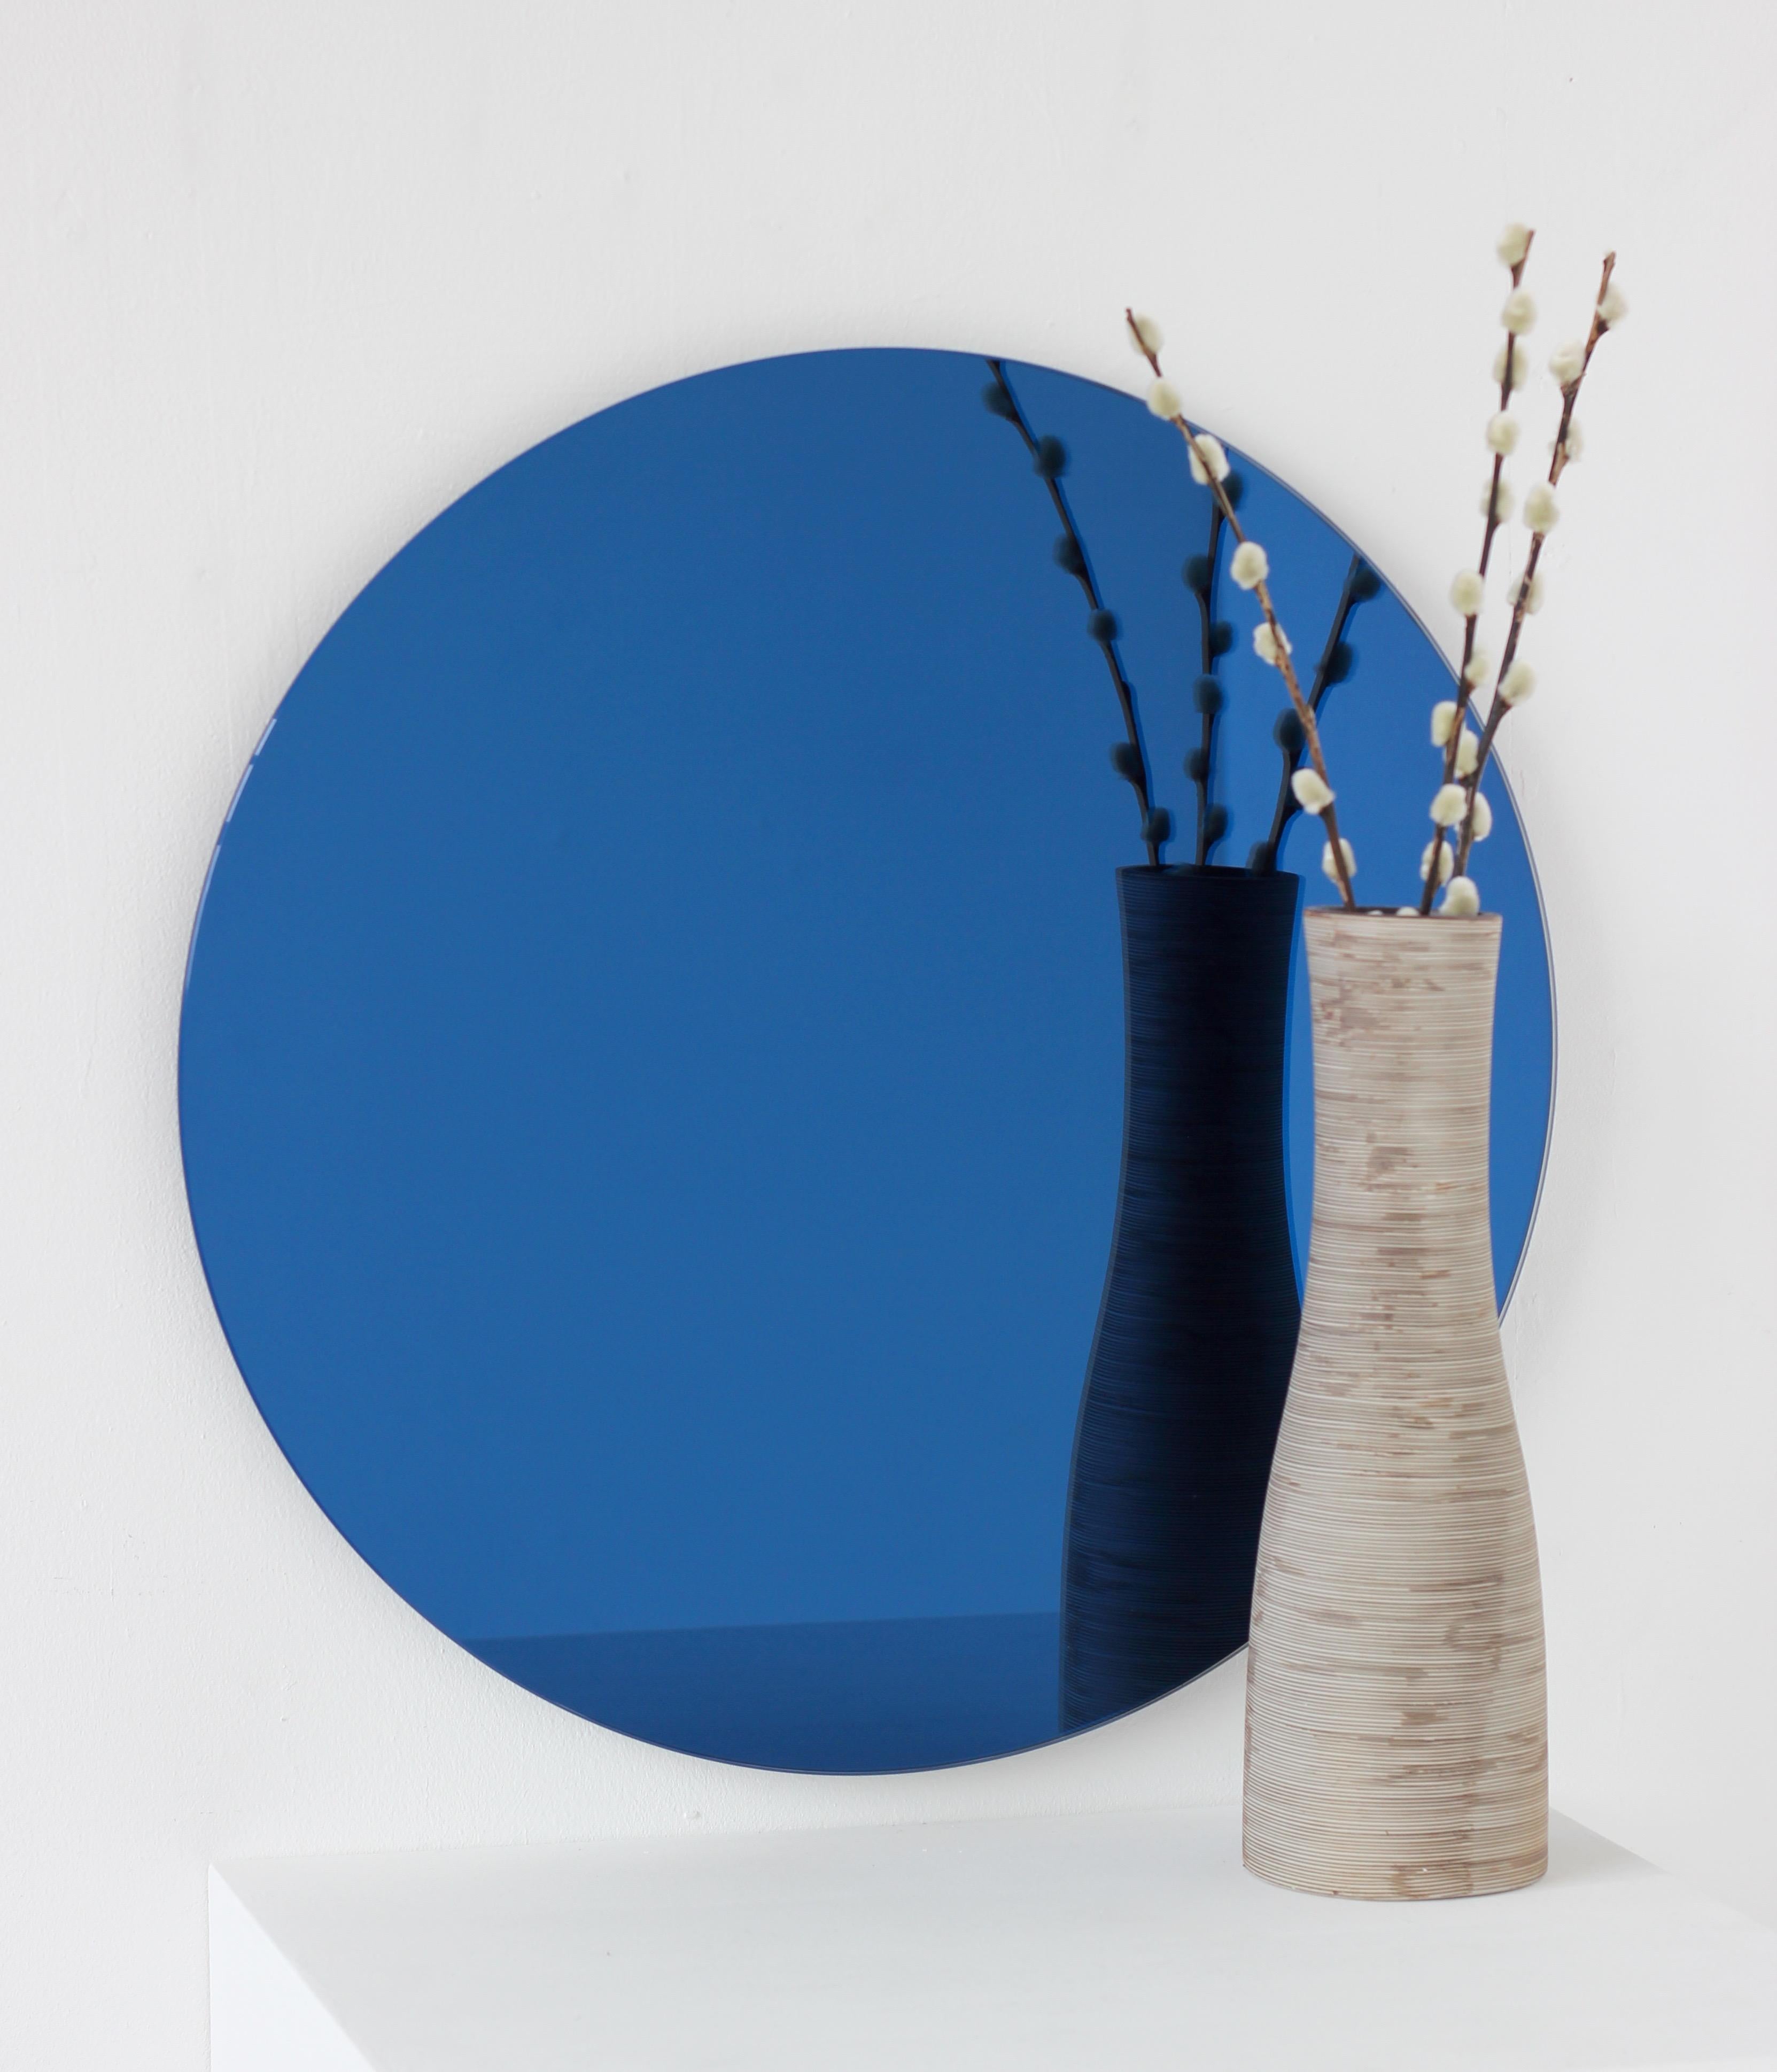 Orbis Blue Tinted Round Contemporary Frameless Mirror, Regular In New Condition For Sale In London, GB